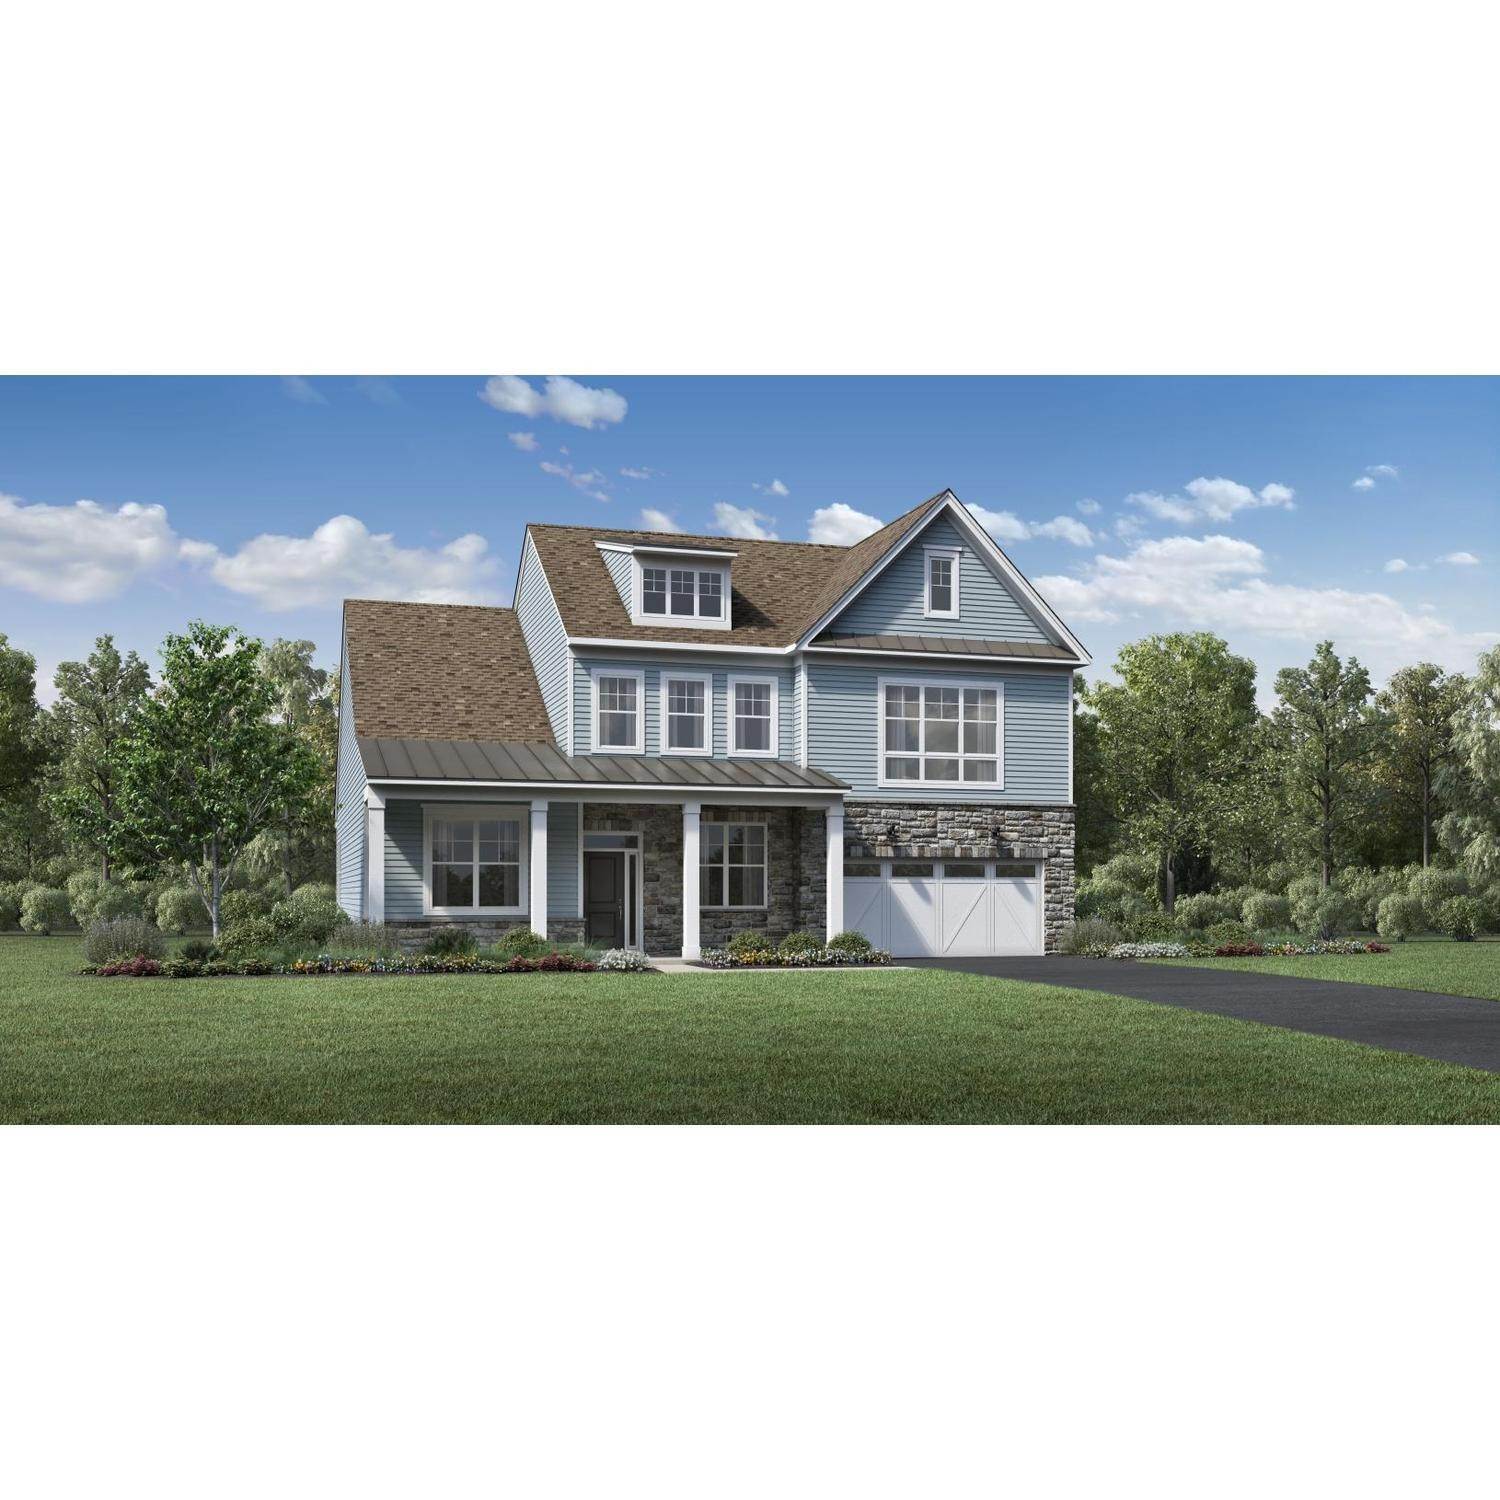 Single Family for Sale at Manalapan, NJ 07726